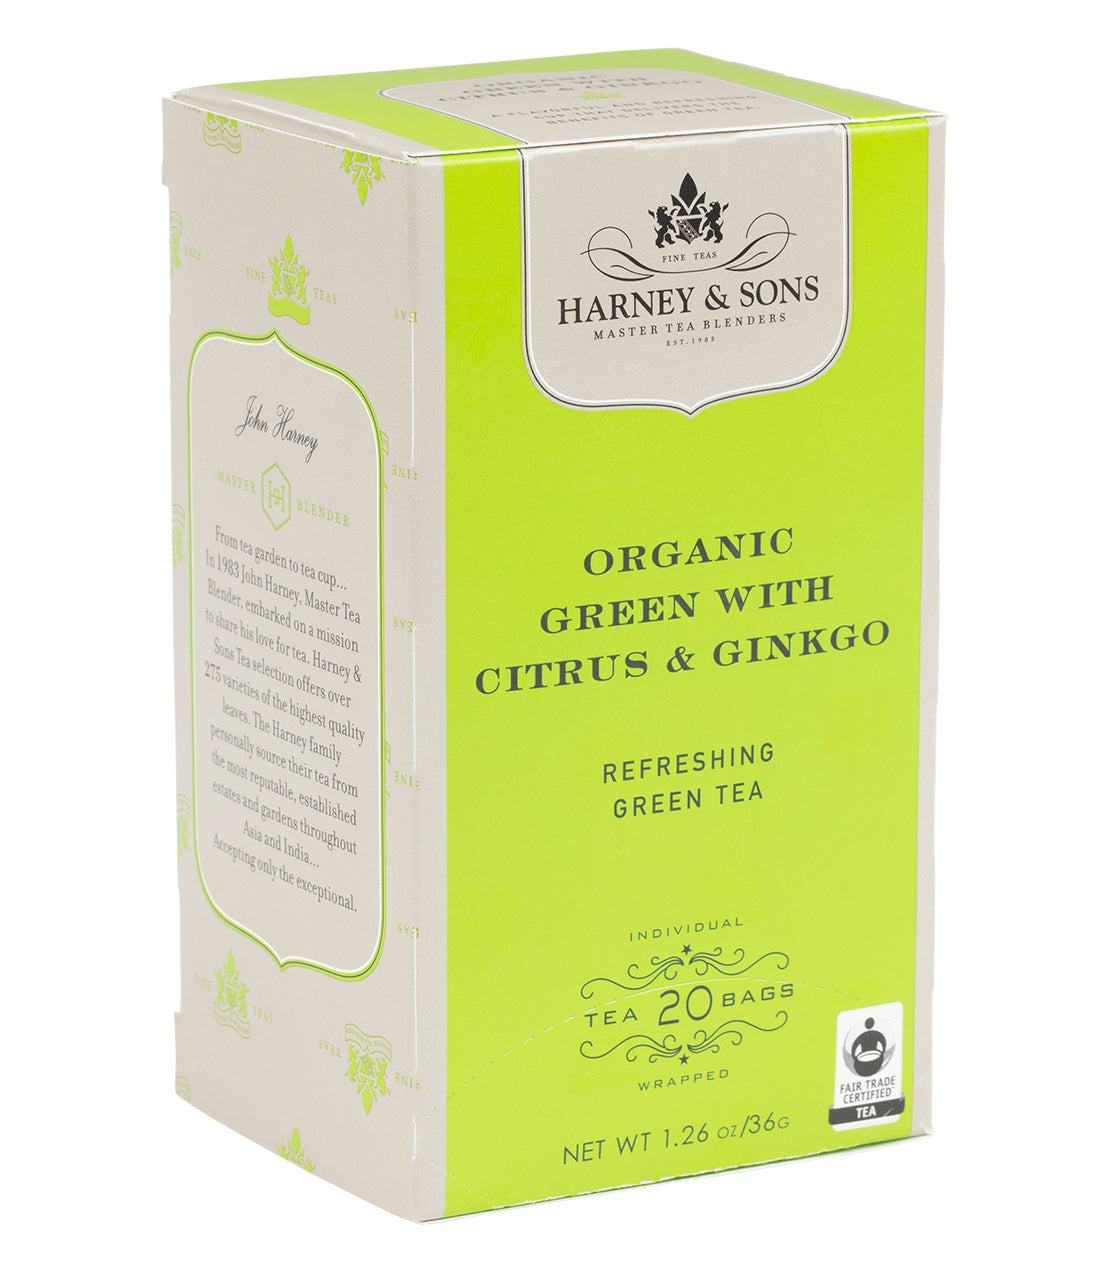 Organic Green with Citrus & Ginkgo, Box of 20 Premium Teabags